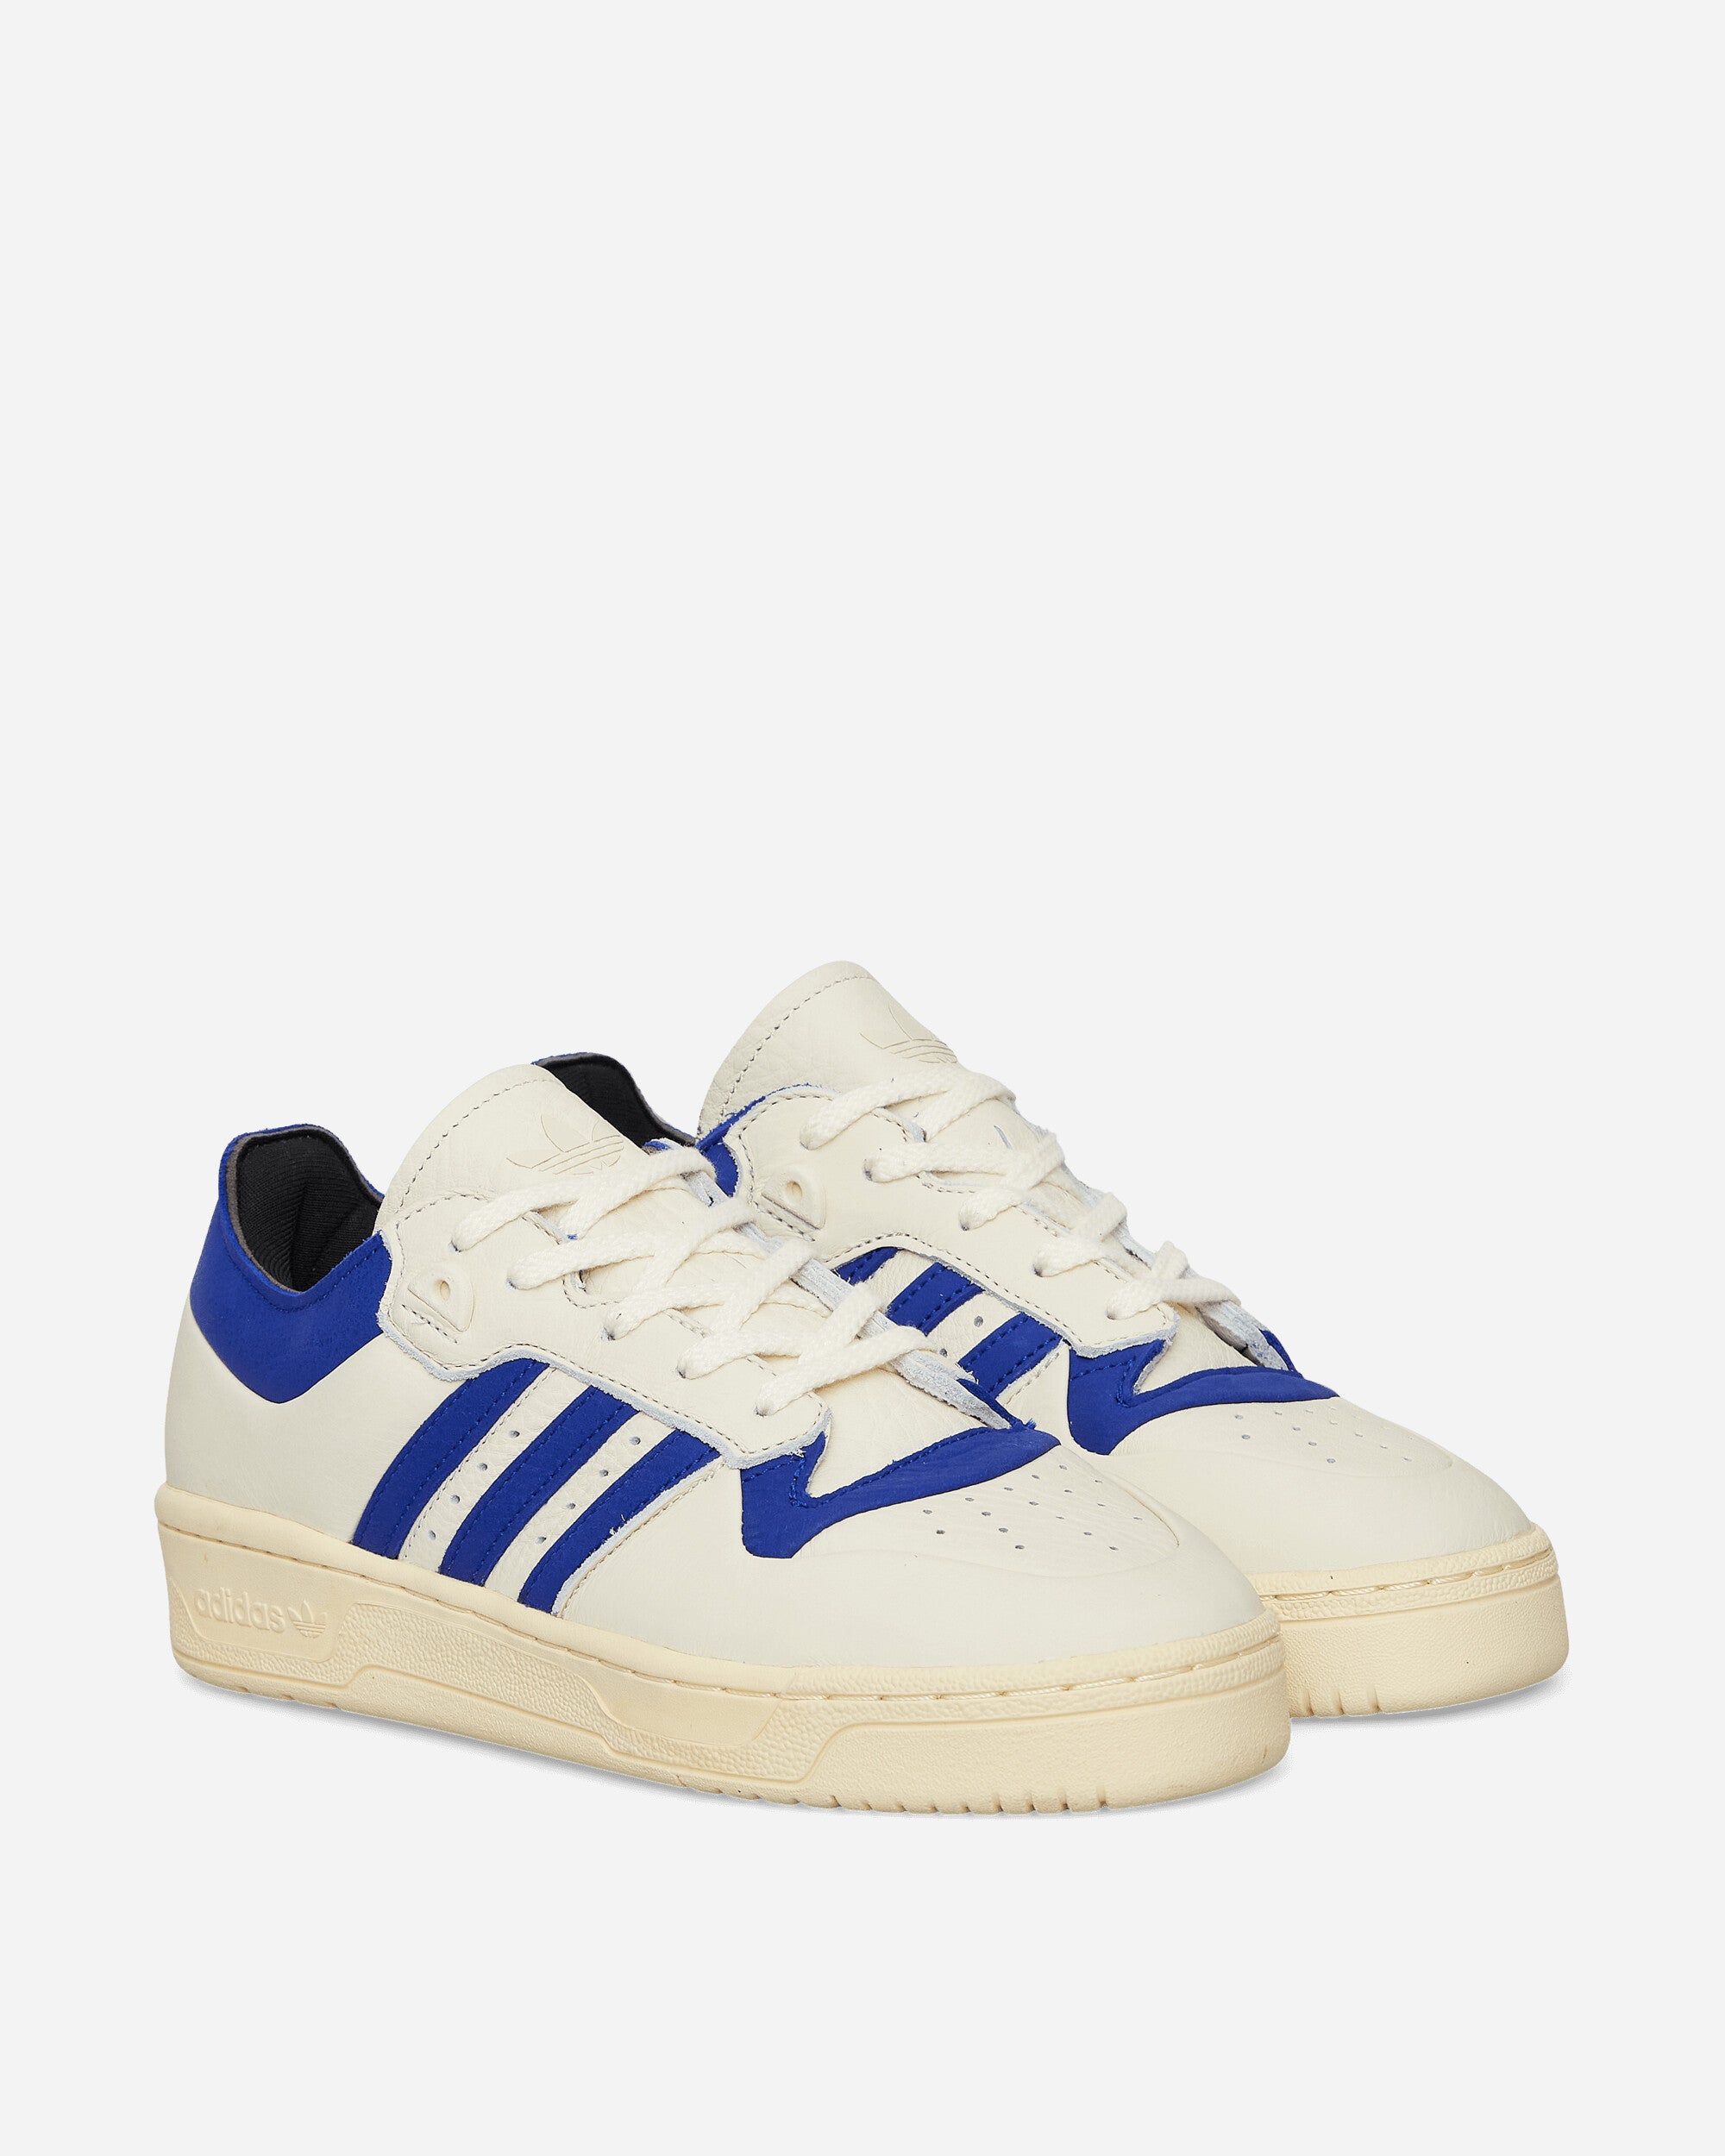 adidas Rivalry 86 Low 002 Cream White/Lucid Blue Sneakers Low IF4437 001